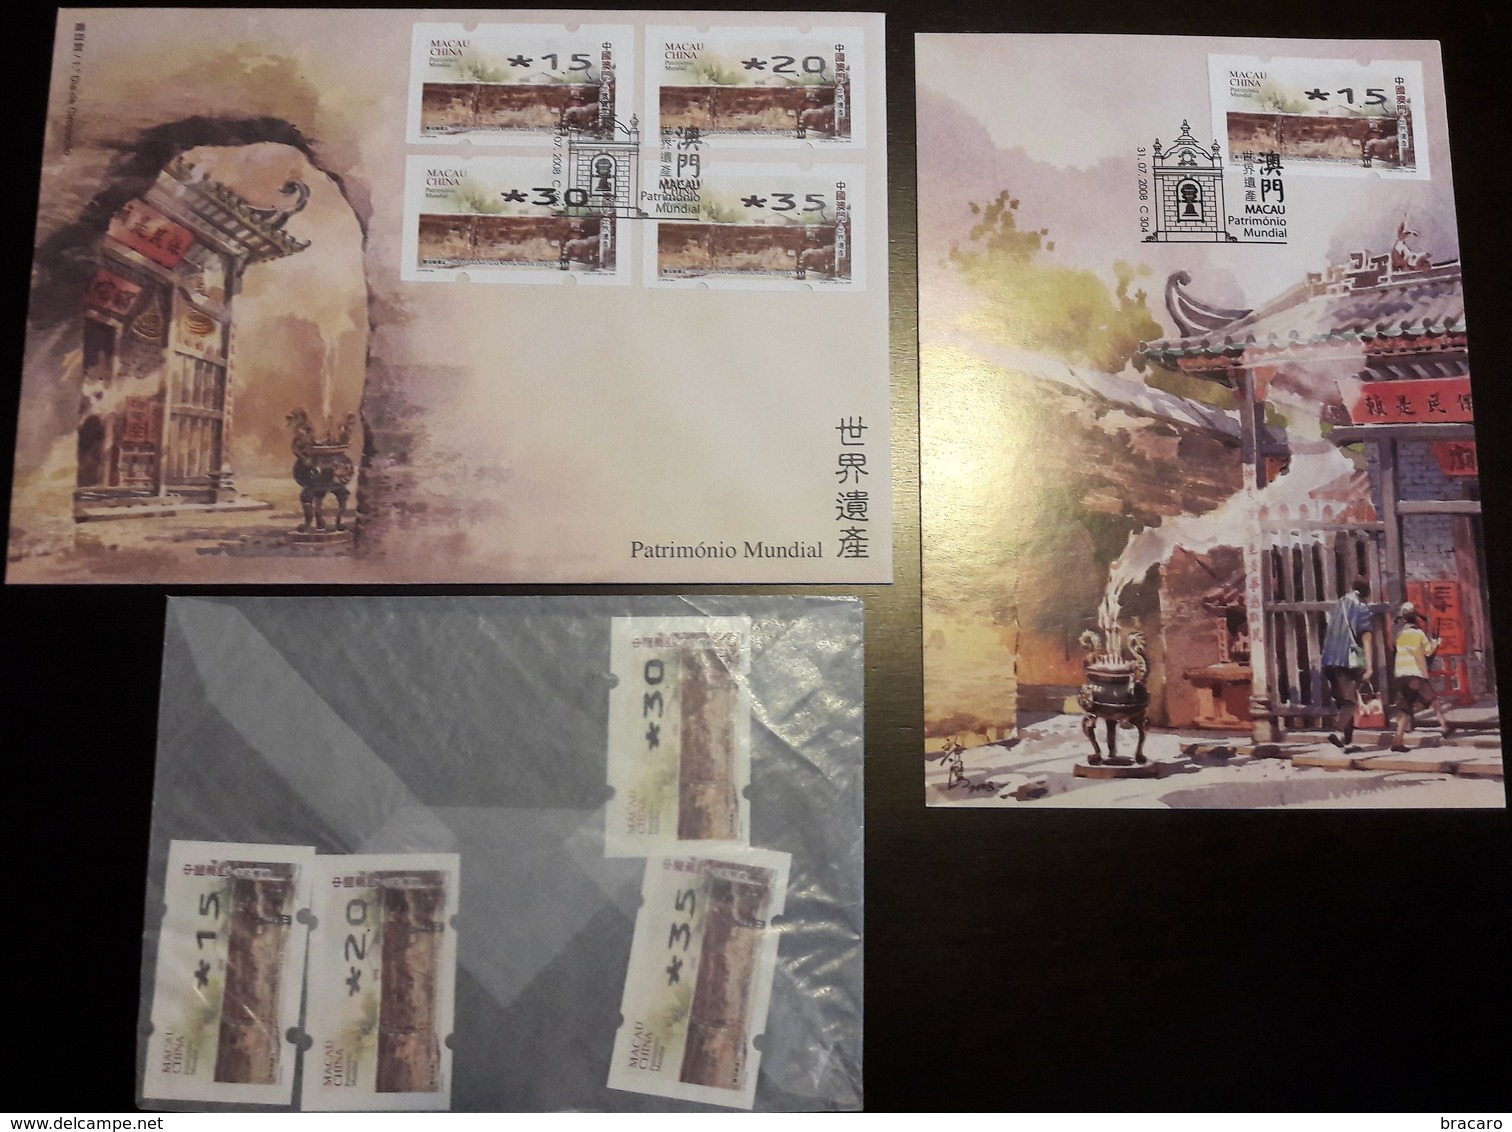 MACAU / MACAO (CHINA) - World Heritage 2008 - Full Set Stamps + FDC + 9 Maximum Cards + Full Set ATM + FDC ATM + Leaflet - Collections, Lots & Séries